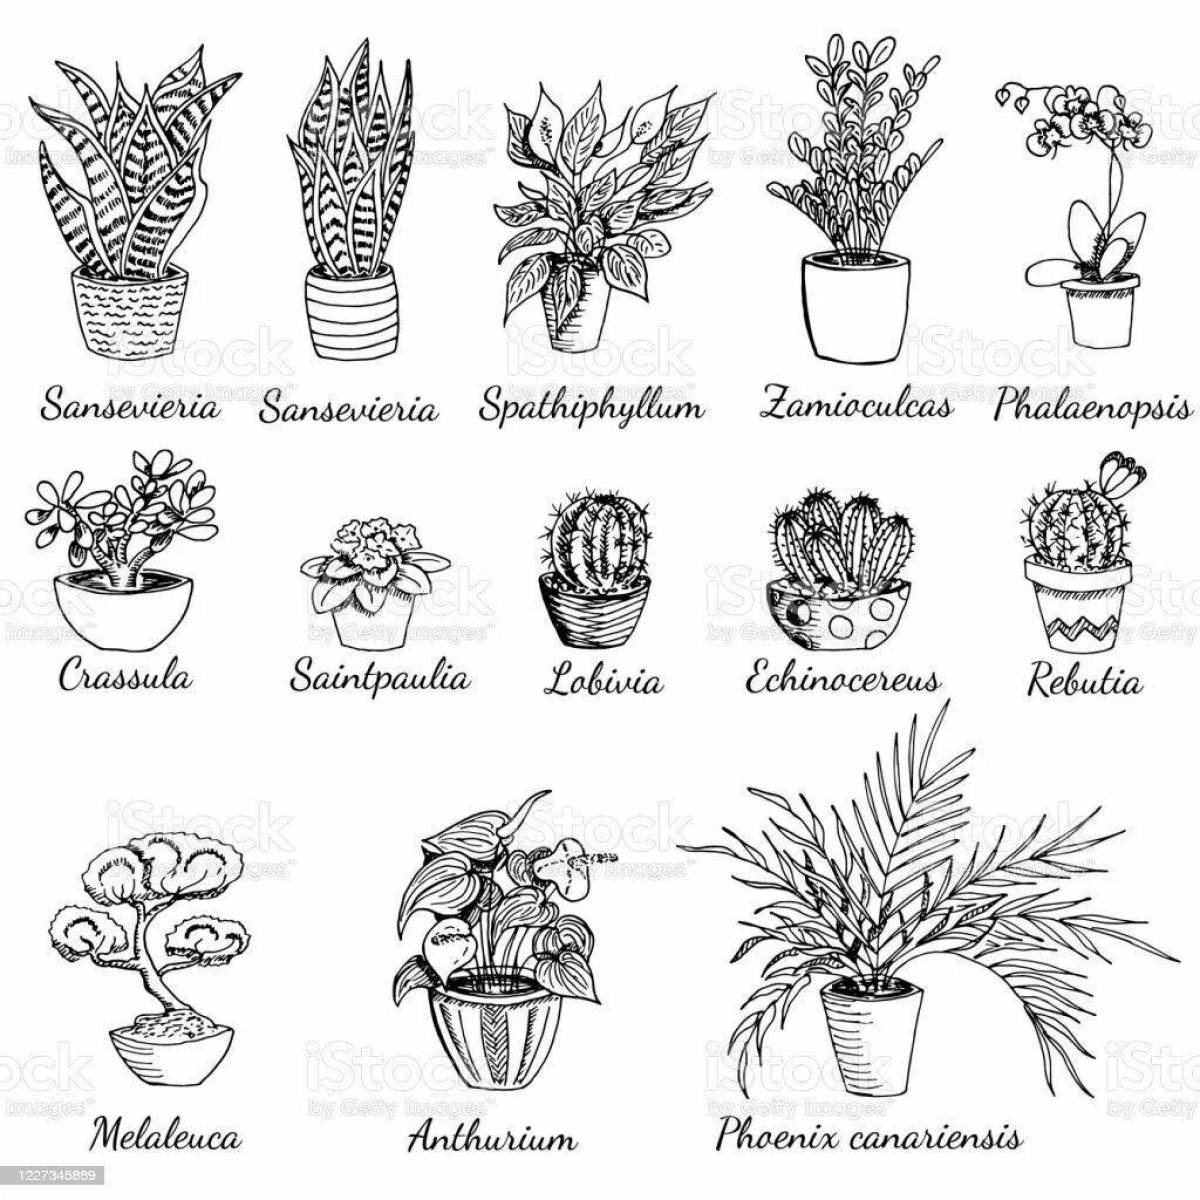 Awesome houseplant coloring pages for 6-7 year olds